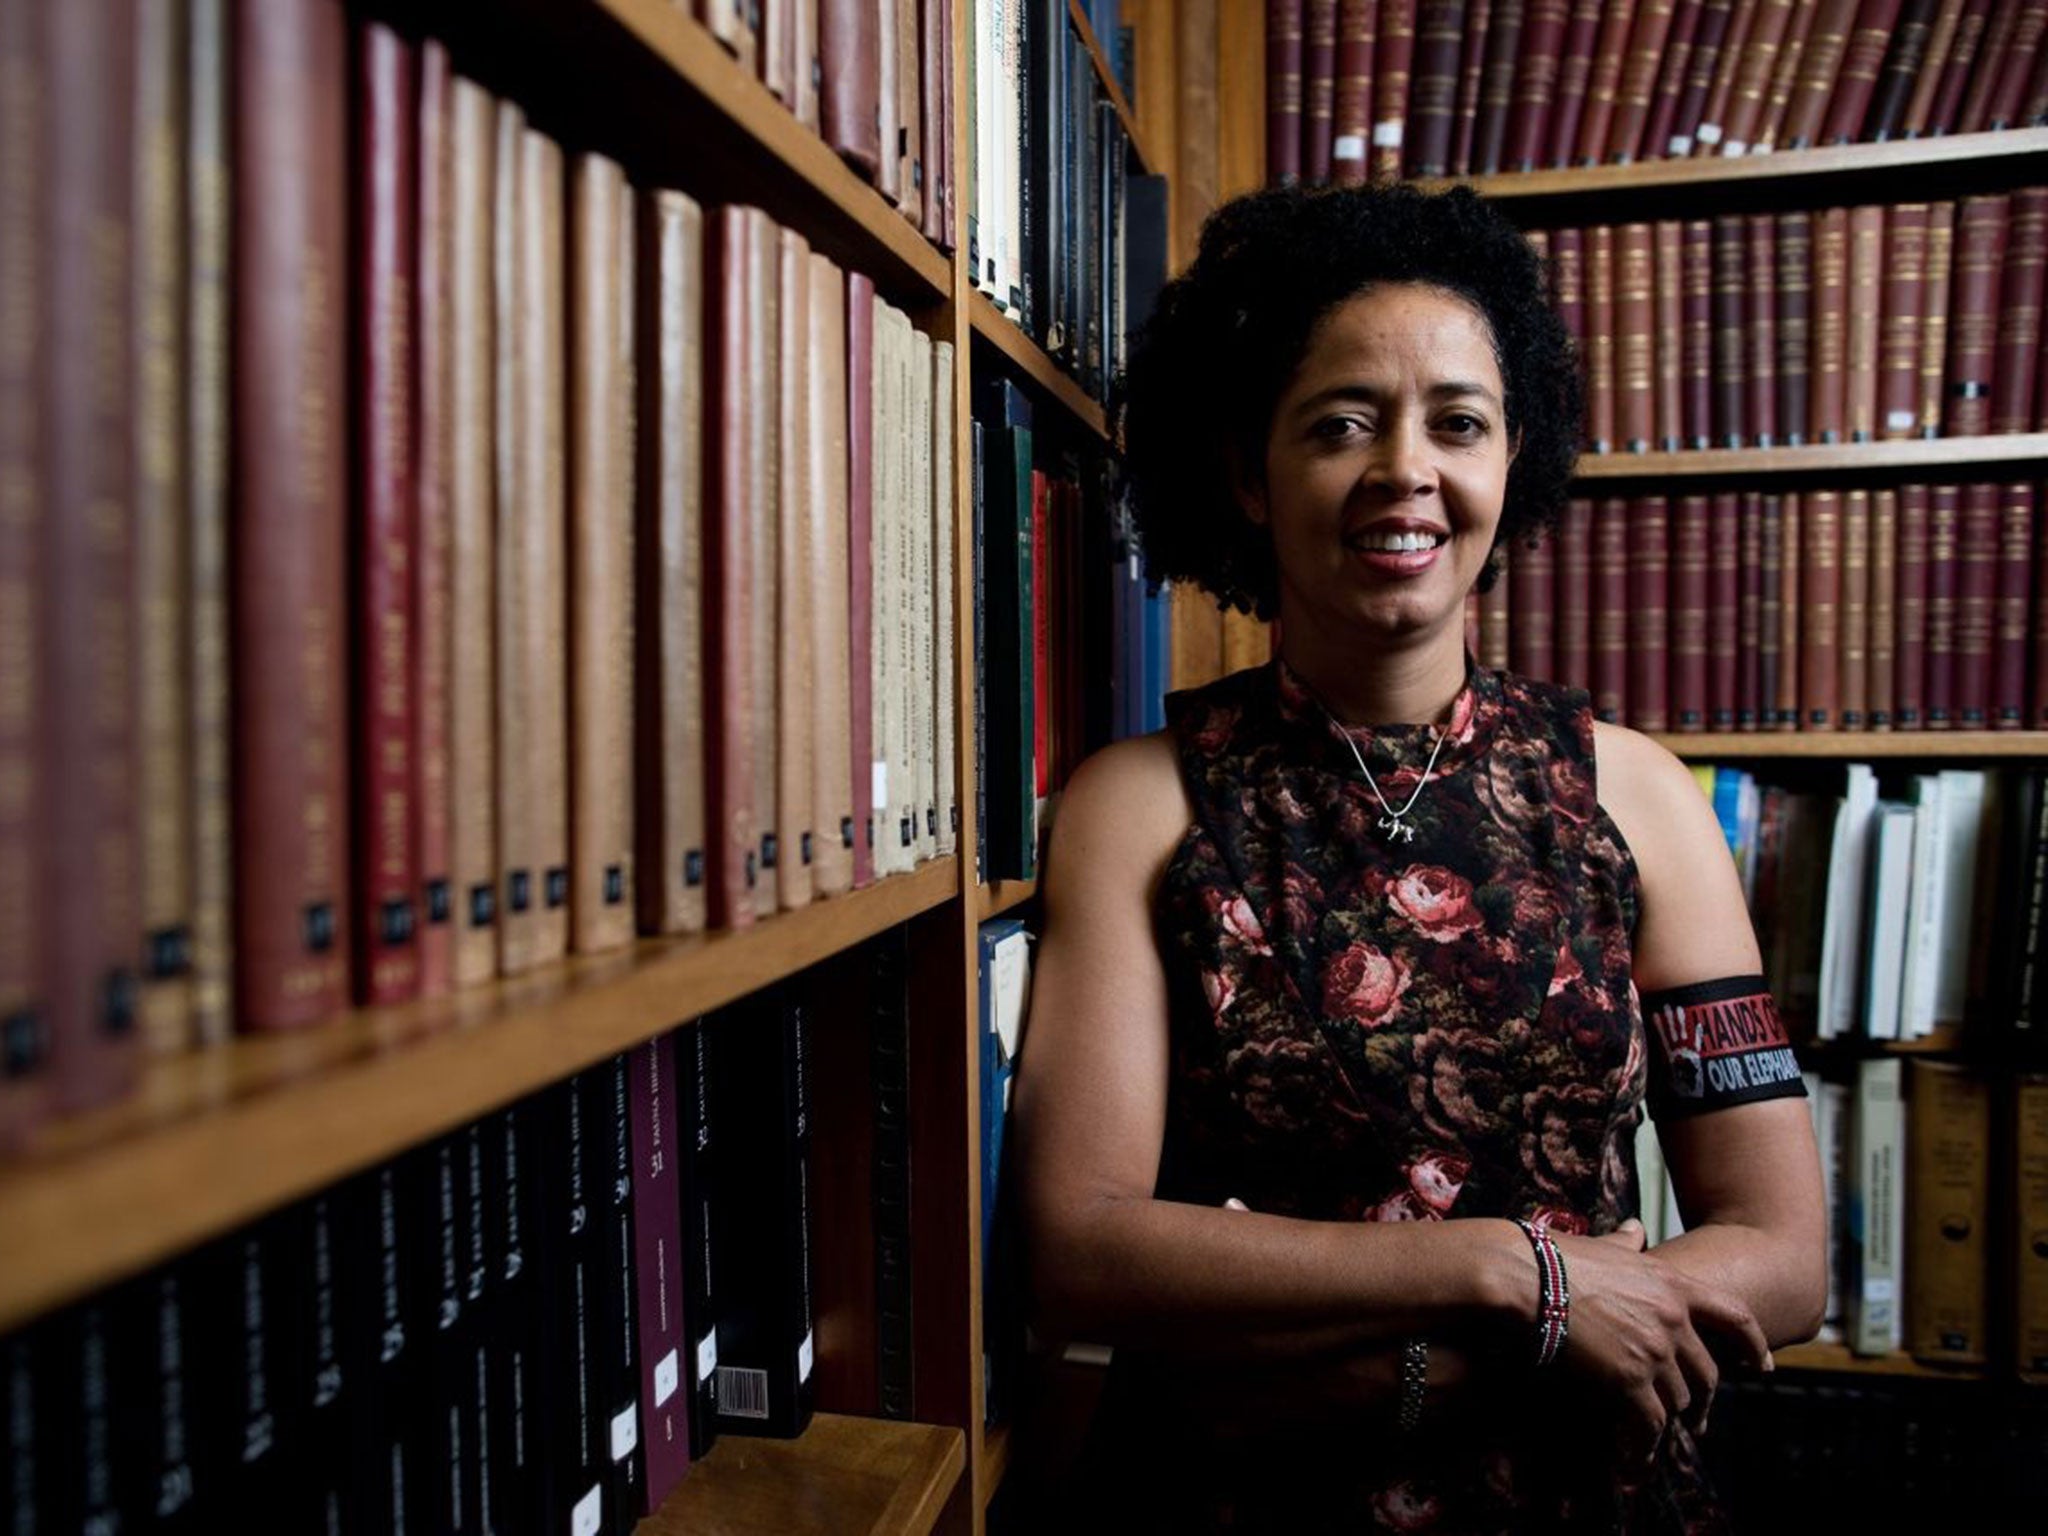 Ecologist Paula Kahumbu says the answers must come from Africa, and from African women